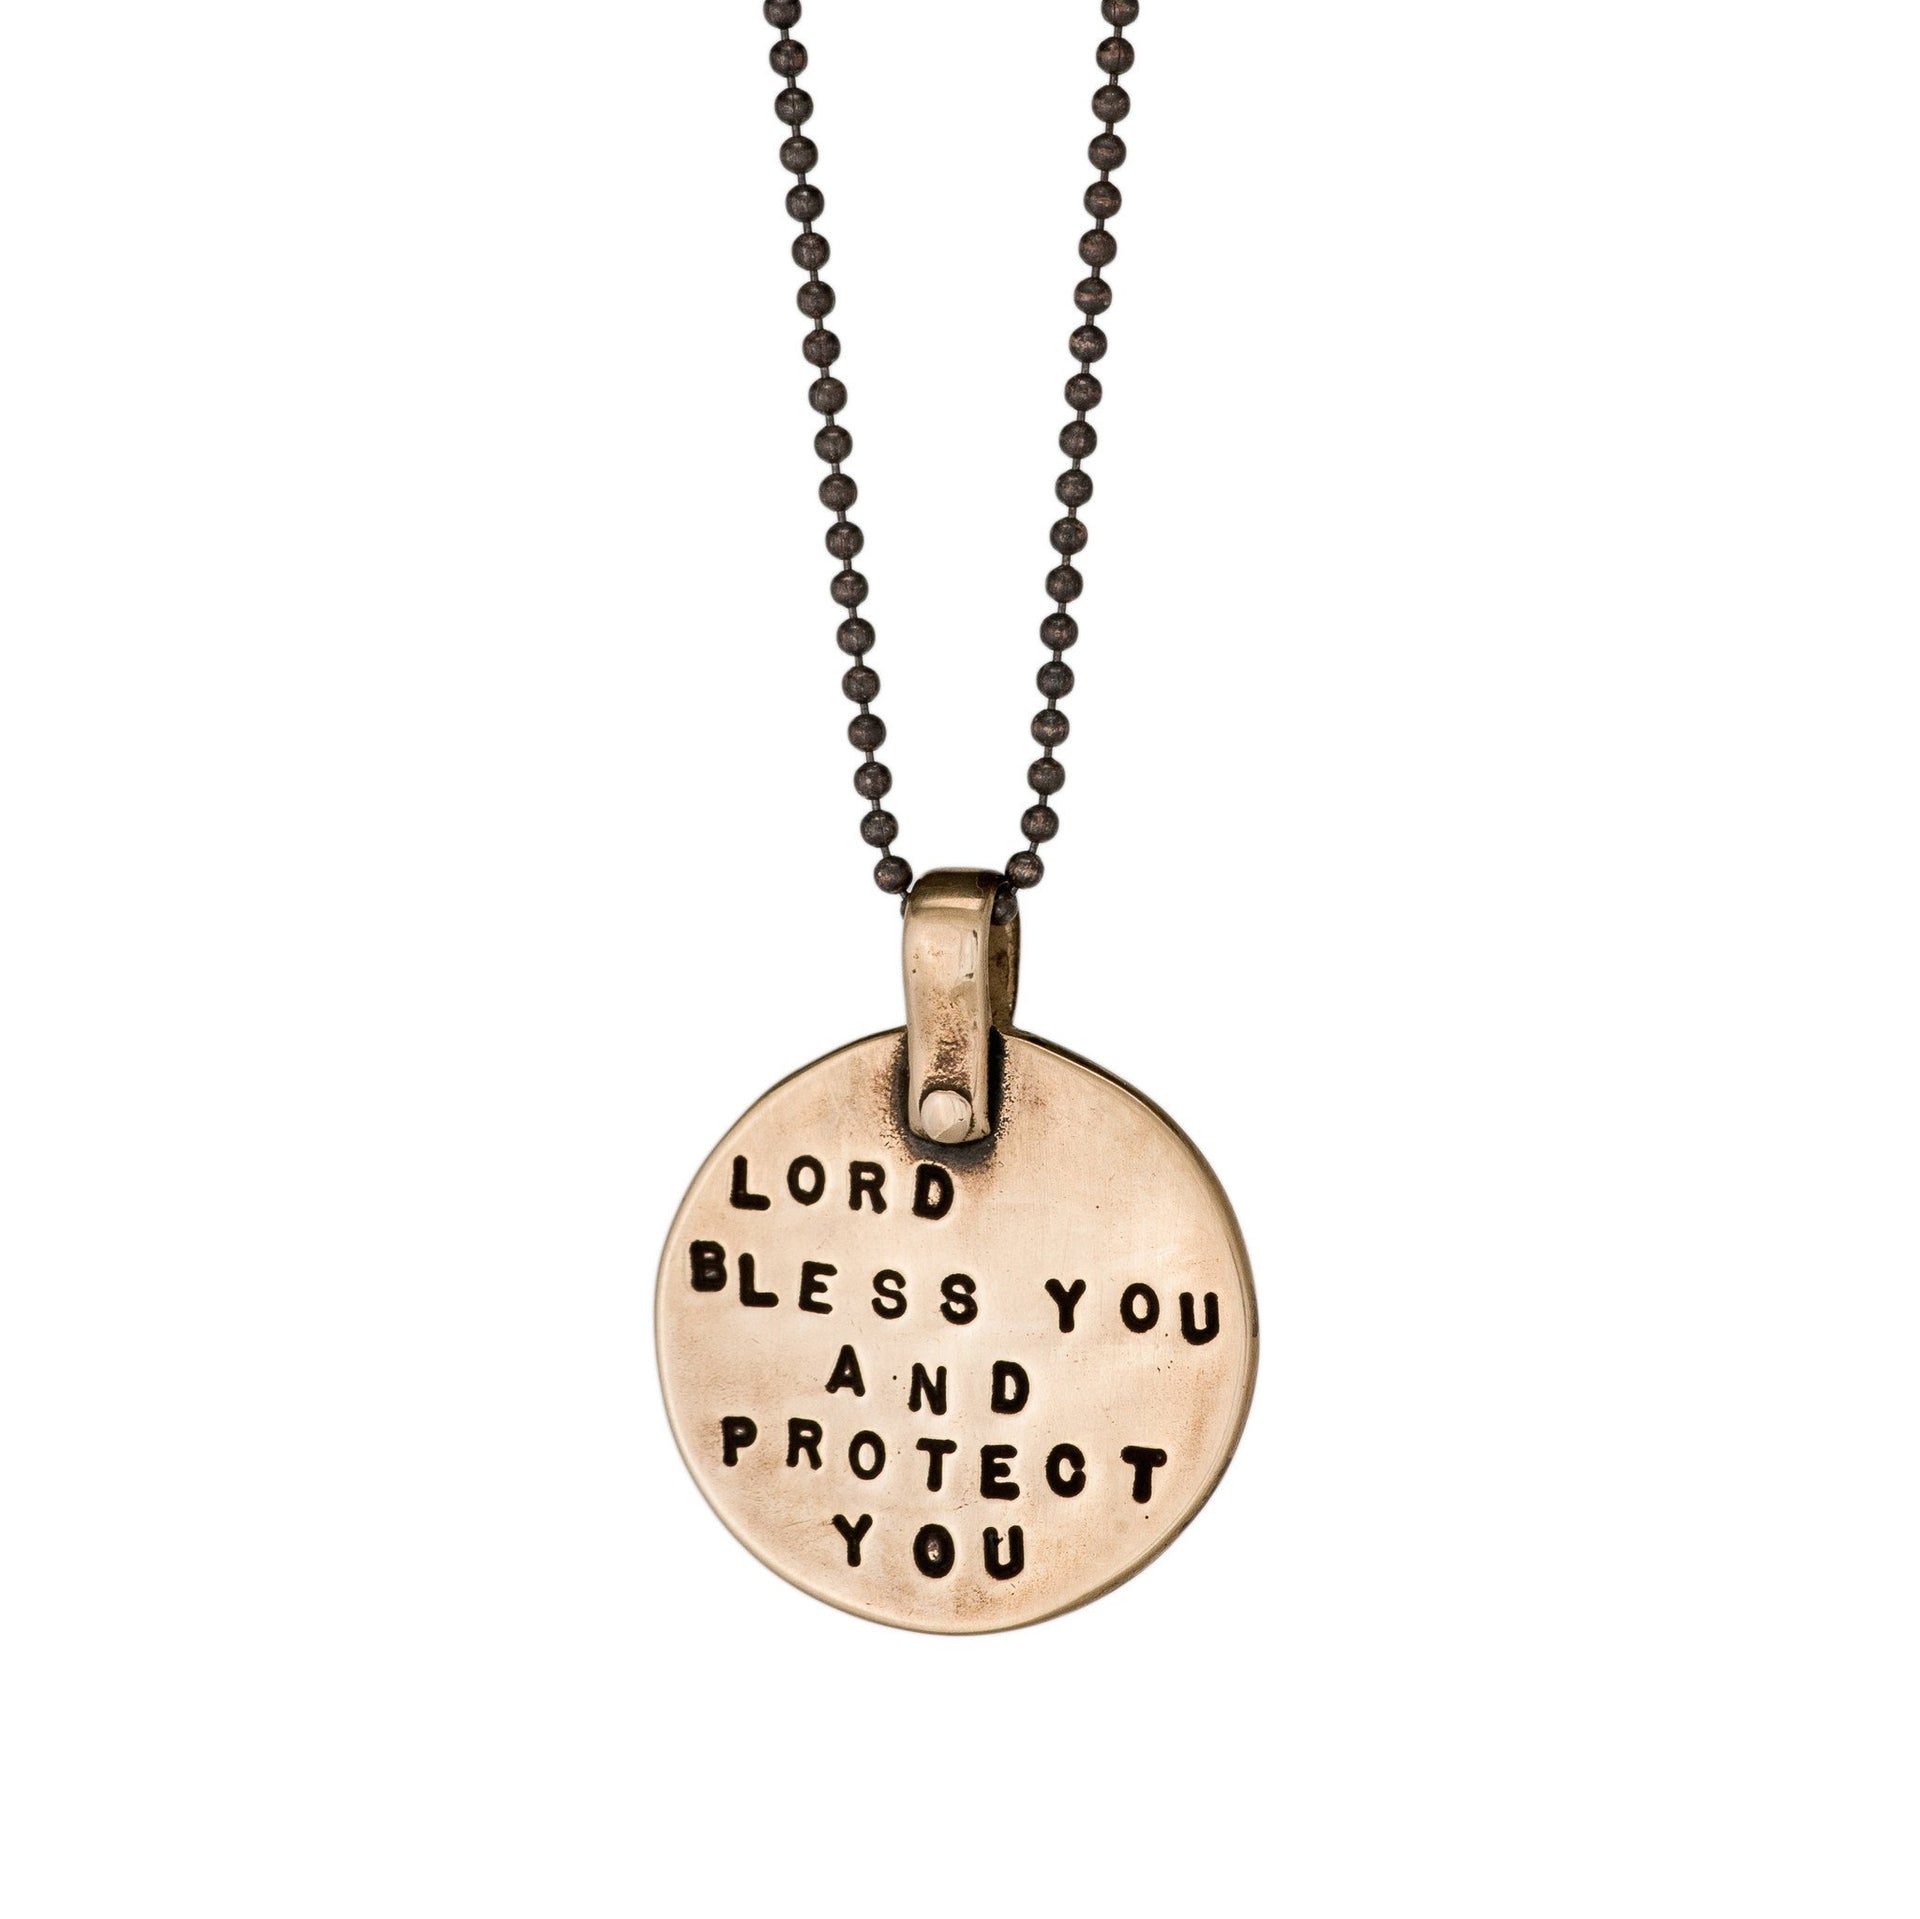 Marla Studio Necklaces Bronze / Chain / 16" Lord Bless You and Protect You Necklace by Marla Studio - Silver or Bronze